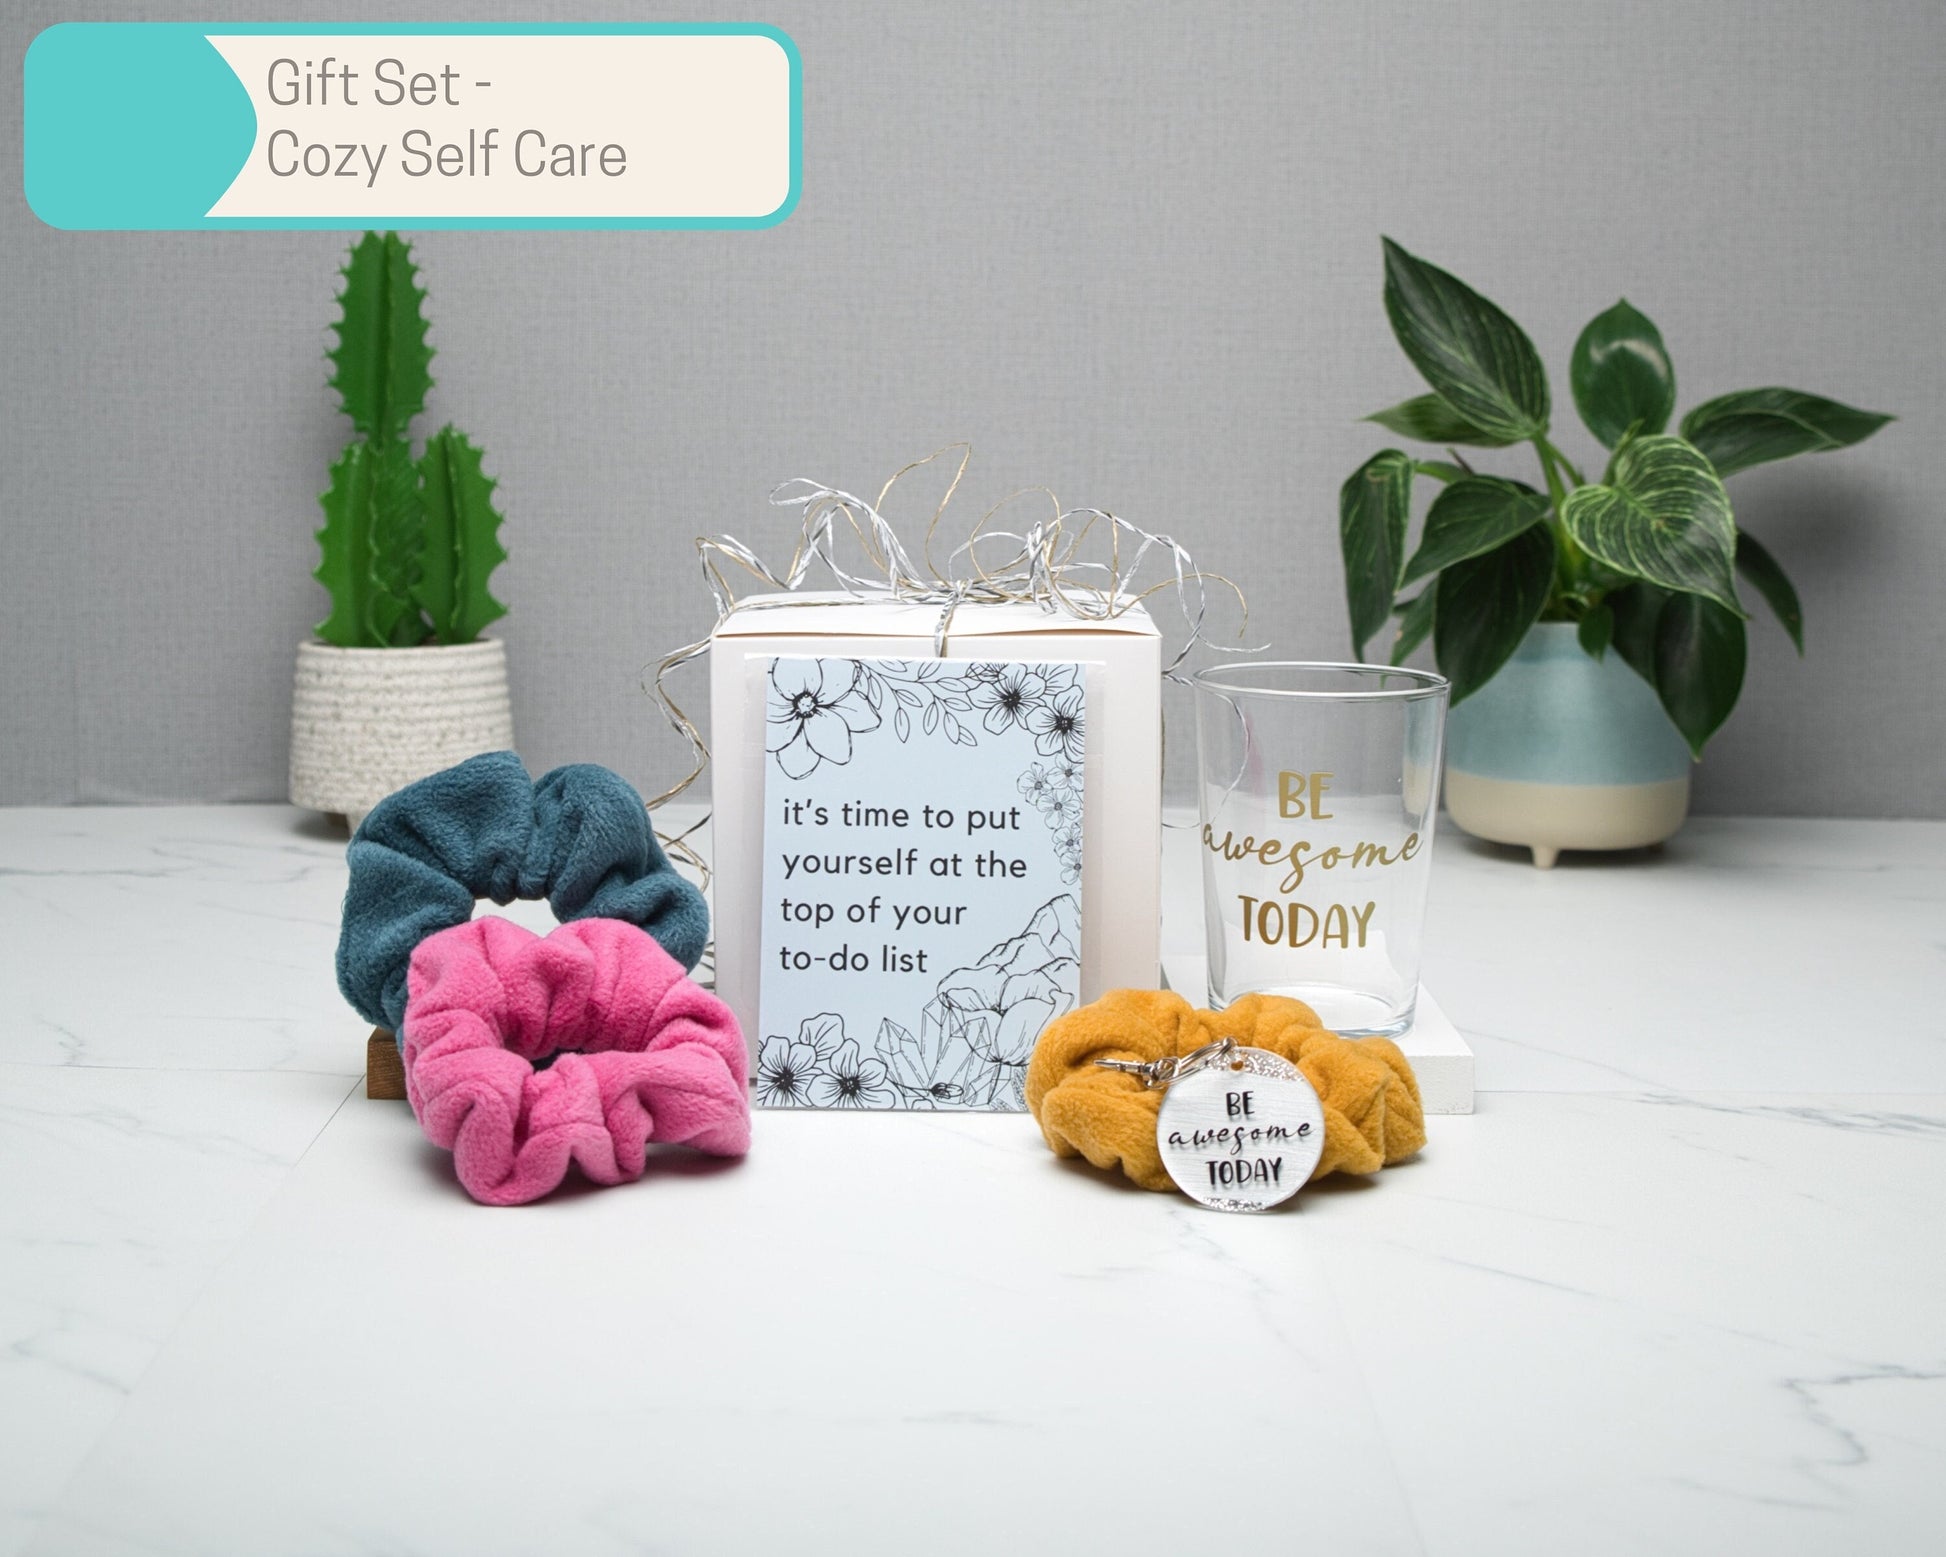 Cozy Self Care Wall Art Gift Sets in Multiple Sizes, Scrunchies, A6 Art Print, keyring, candle, 500ml glass tumbler, Home Decor Gift Box